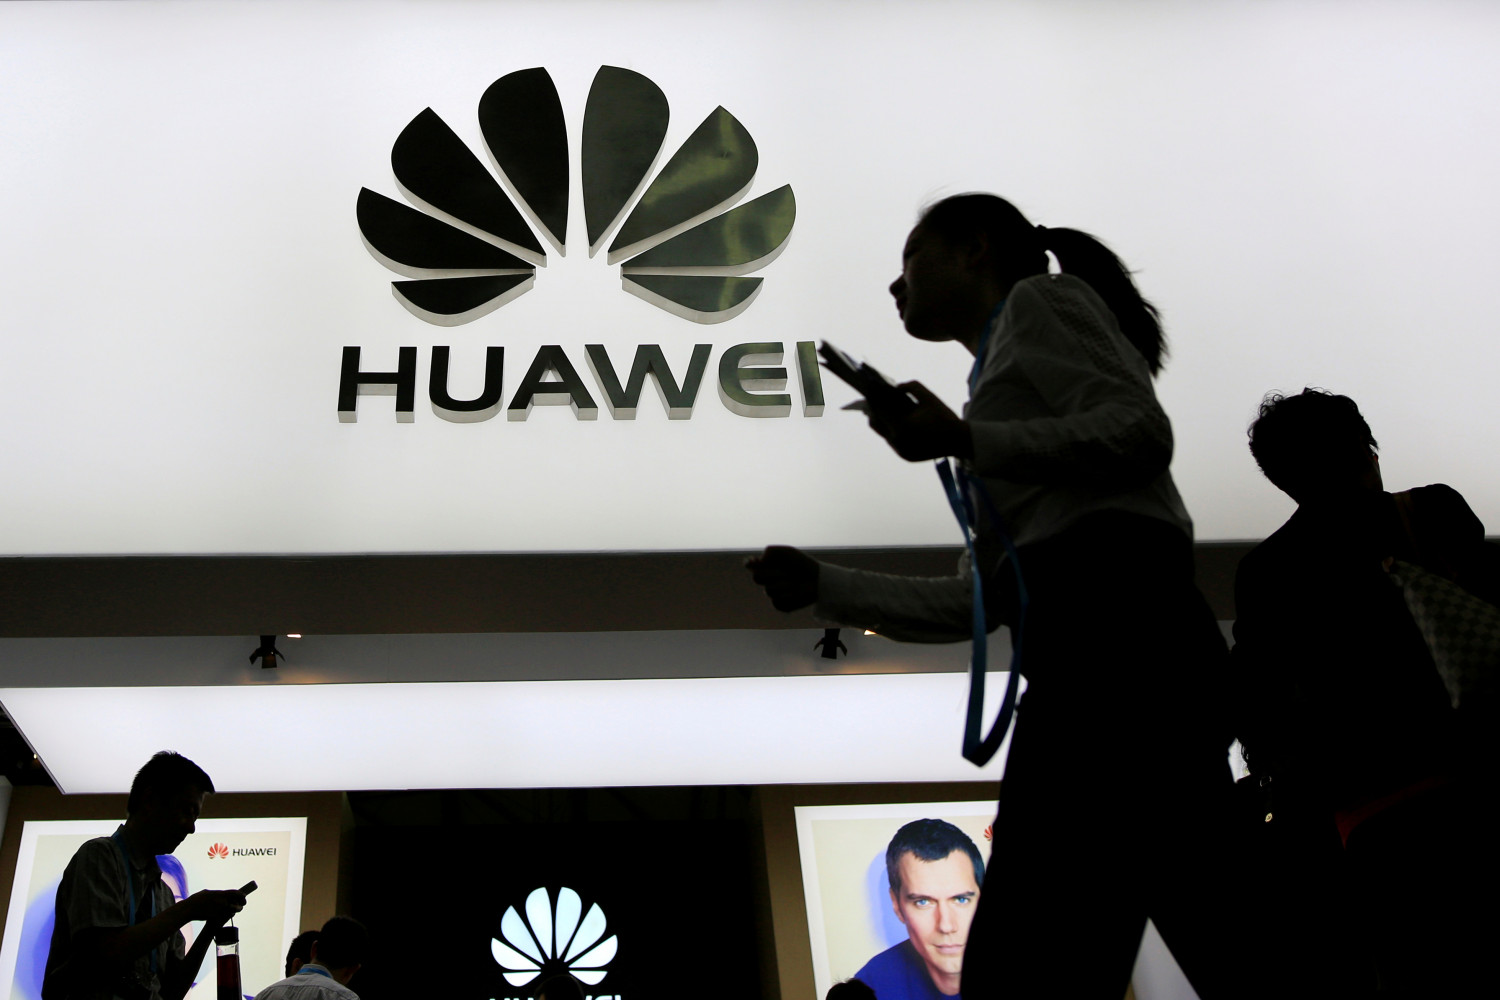 Australia’s 5G Ban on Huawei, ZTE a Safeguard in Case Relations with China Deteriorate, Says Former PM